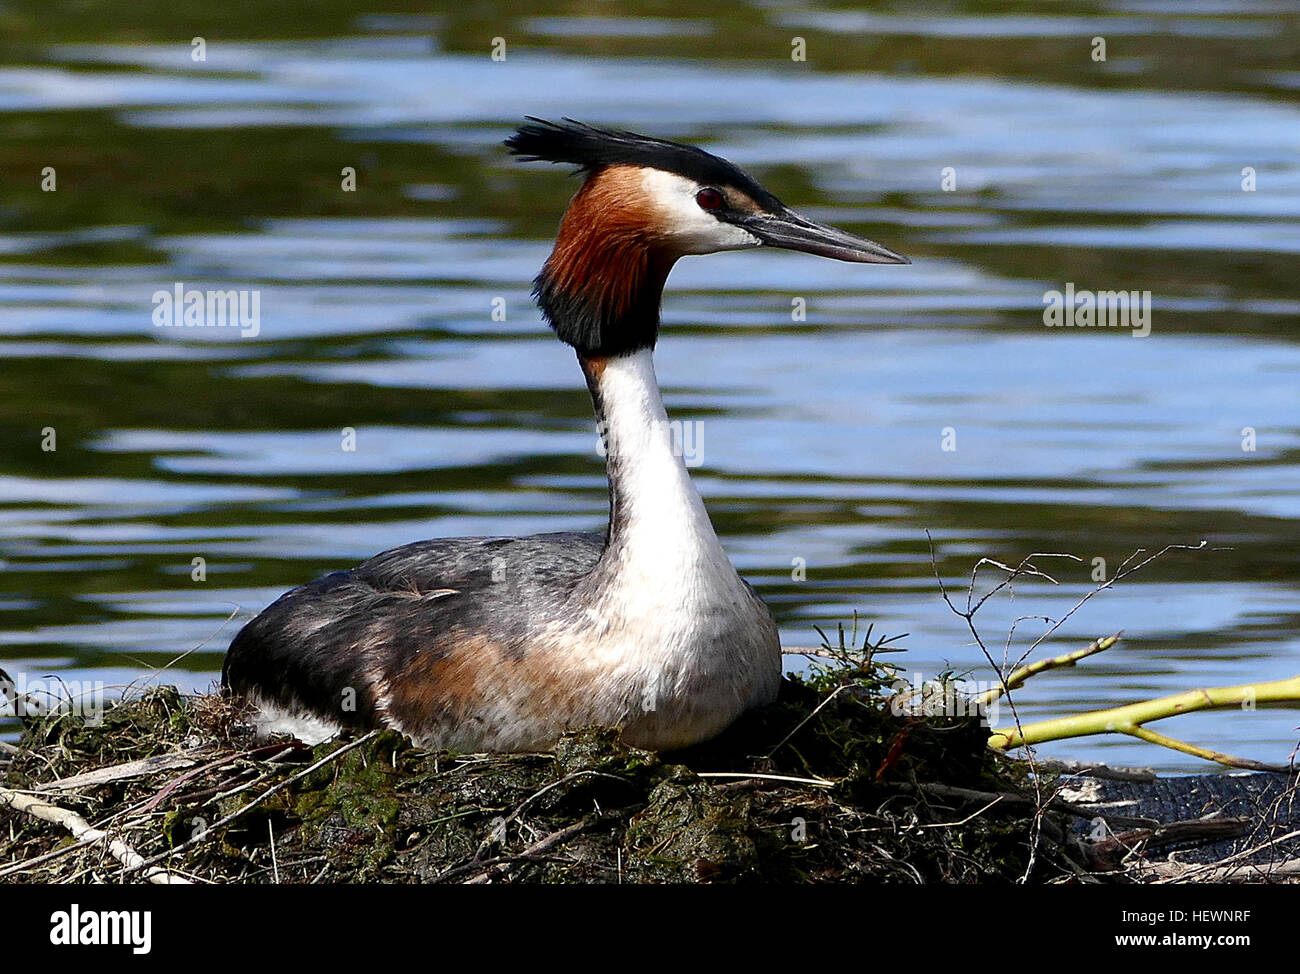 The Australasian crested grebe has a fine, sharp bill, slender neck and head with a distinctive black double crest. Their cheeks have chestnut frills, fringed black. Their legs are set well back on their bodies to enhance their diving skills, at the expense of mobility on land. For this reason, the birds rarely, if ever, come ashore. Stock Photo